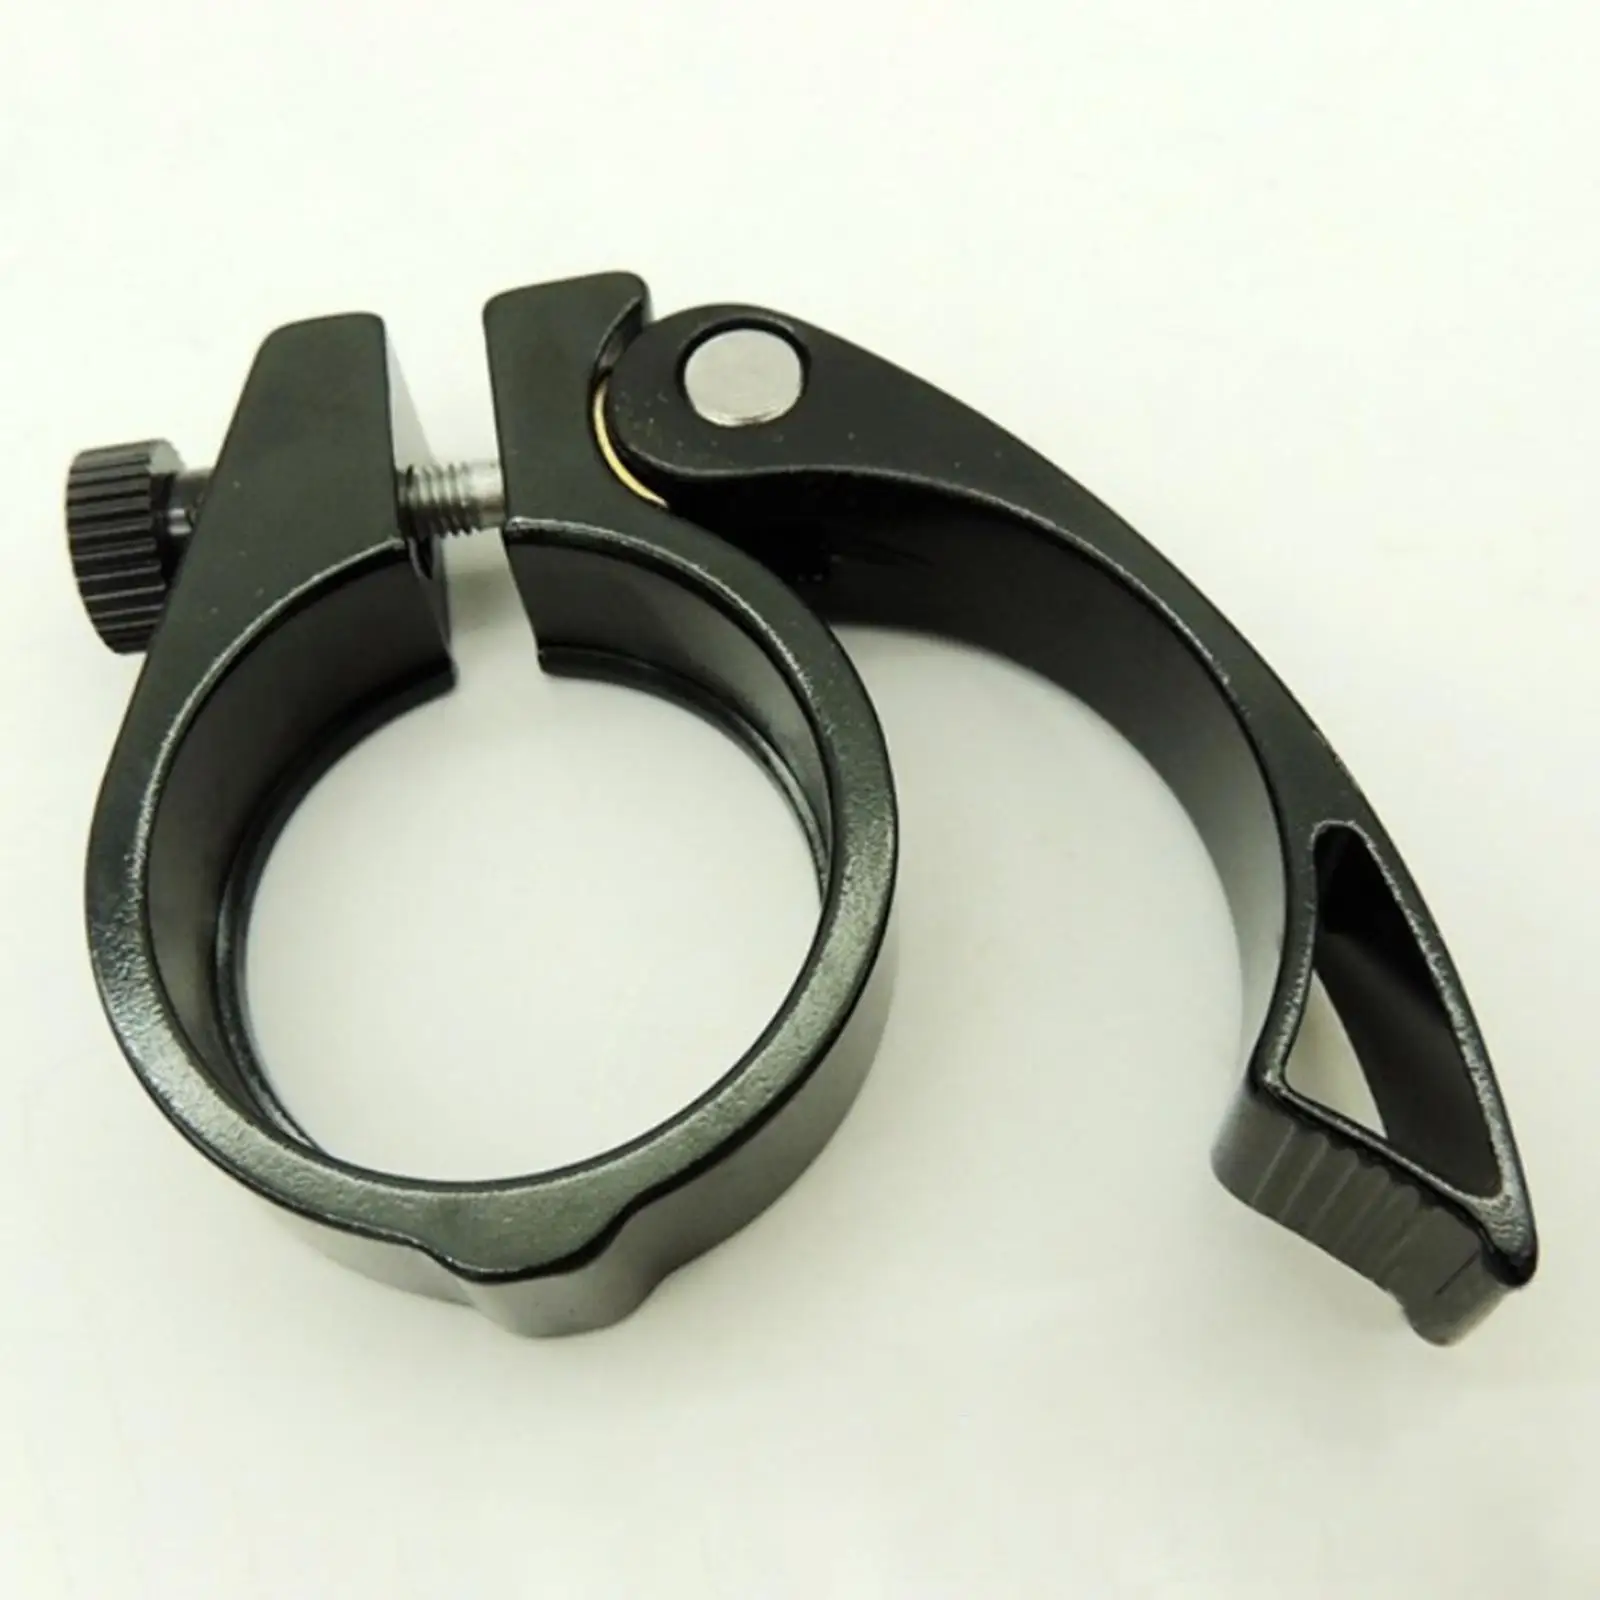 Bike Seat Post Clamp 38mm Folding Seatpost Clamp for Road Bicyle